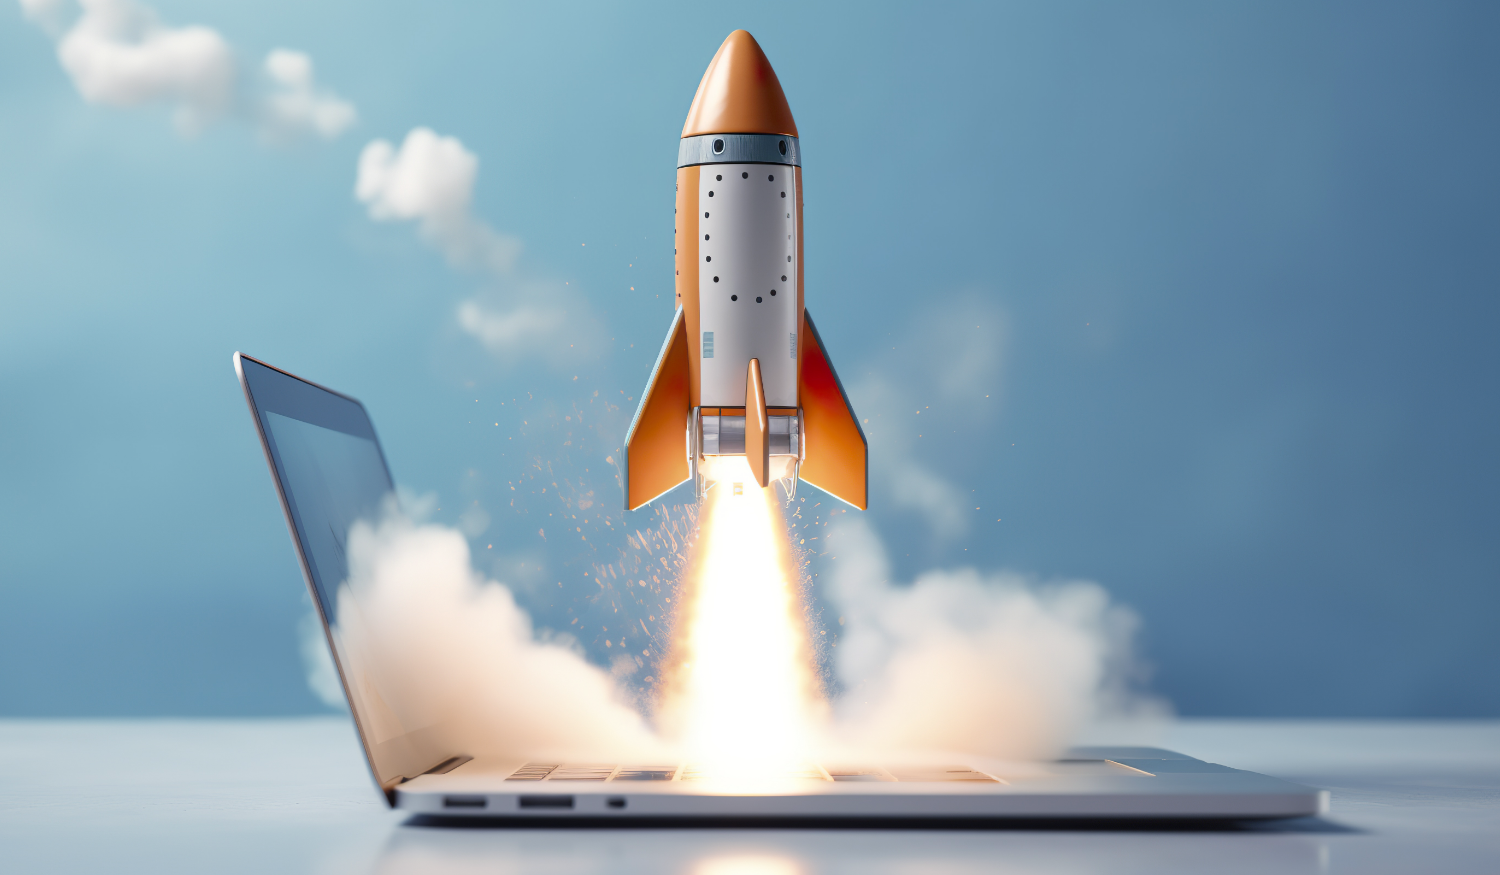 A rocket launching from a laptop symbolizes the increase in sales gained by improving your website design.